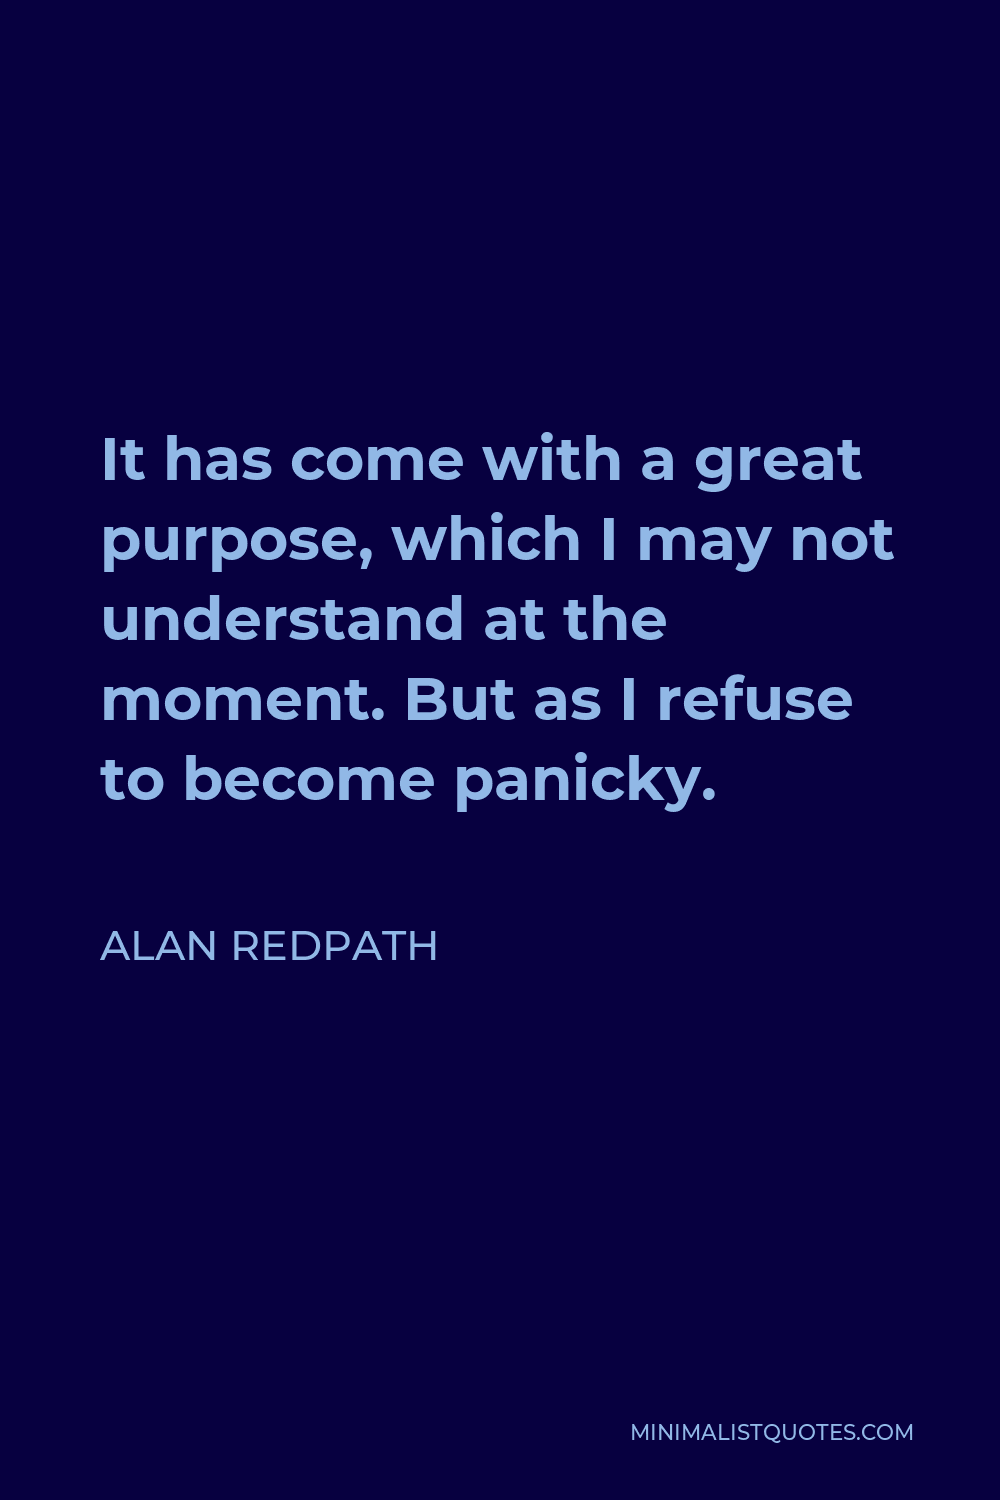 Alan Redpath Quote - It has come with a great purpose, which I may not understand at the moment. But as I refuse to become panicky.